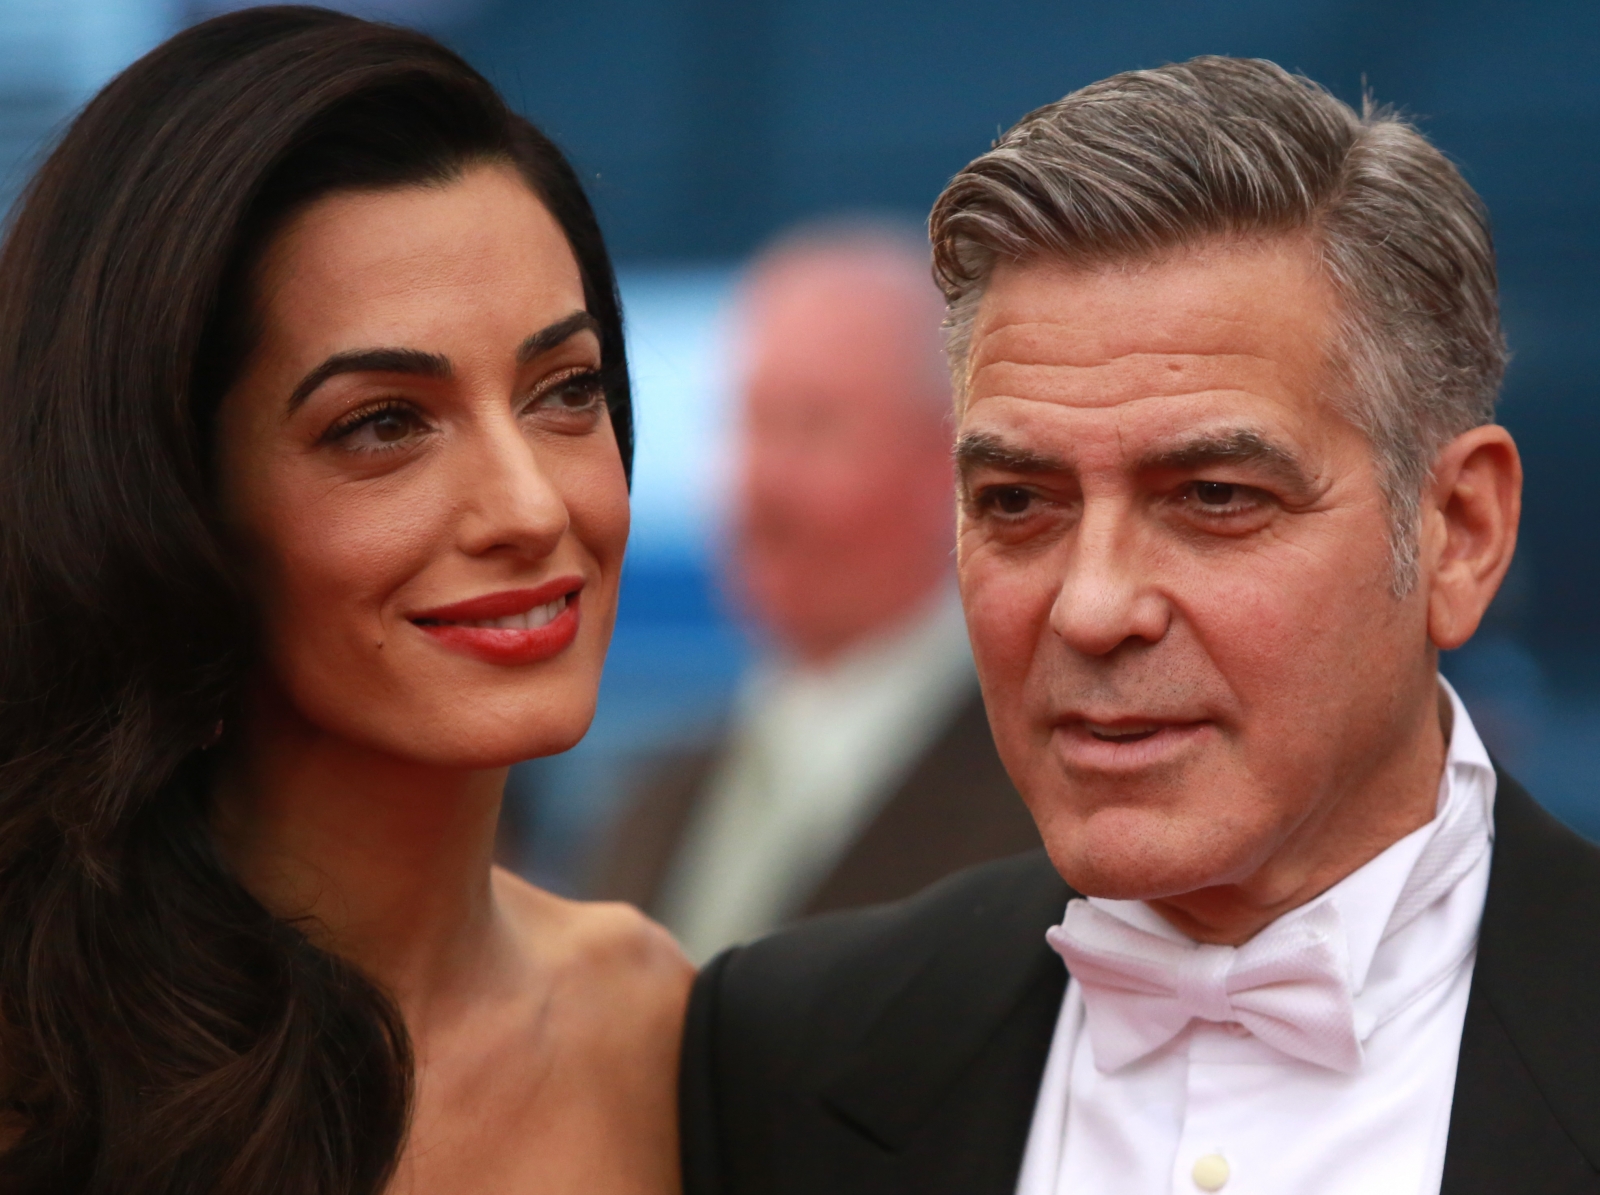 Human rights lawyer Amal Clooney described as 'actor's 